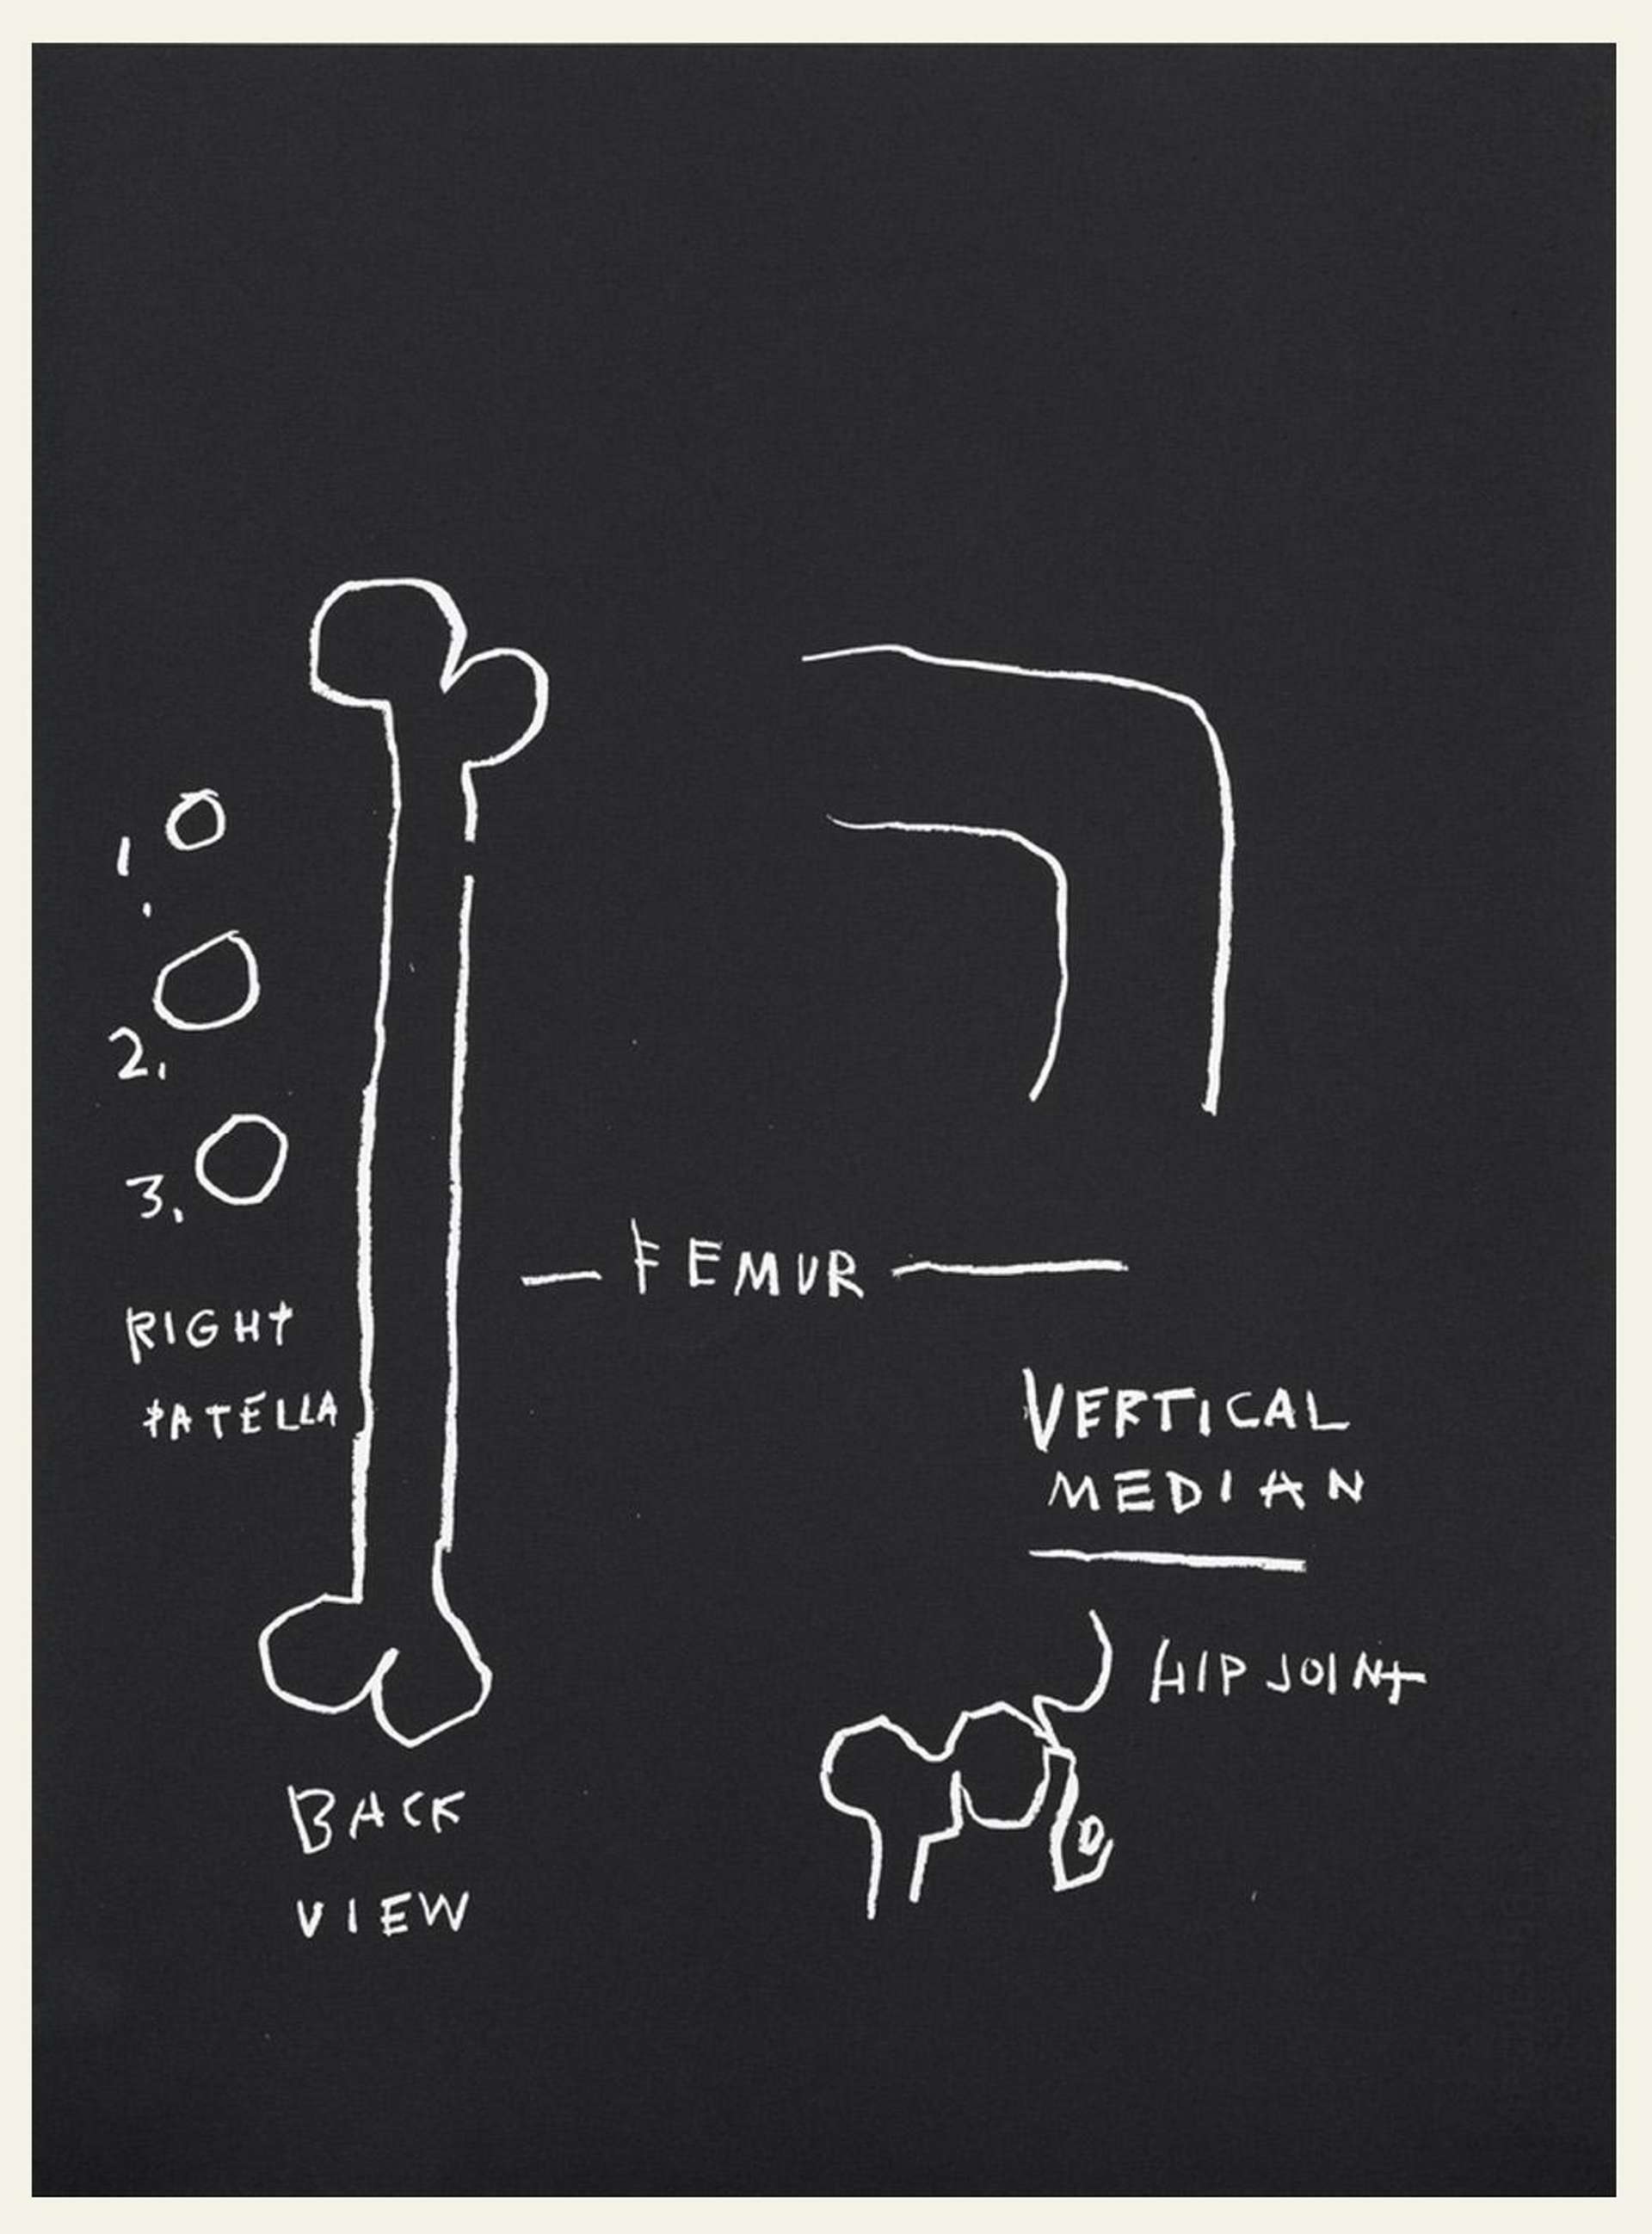 Jean-Michel Basquiat’s Anatomy, Vertical Median. A black screenprint featuring white anatomical drawings of human bones and joints with descriptive labels.